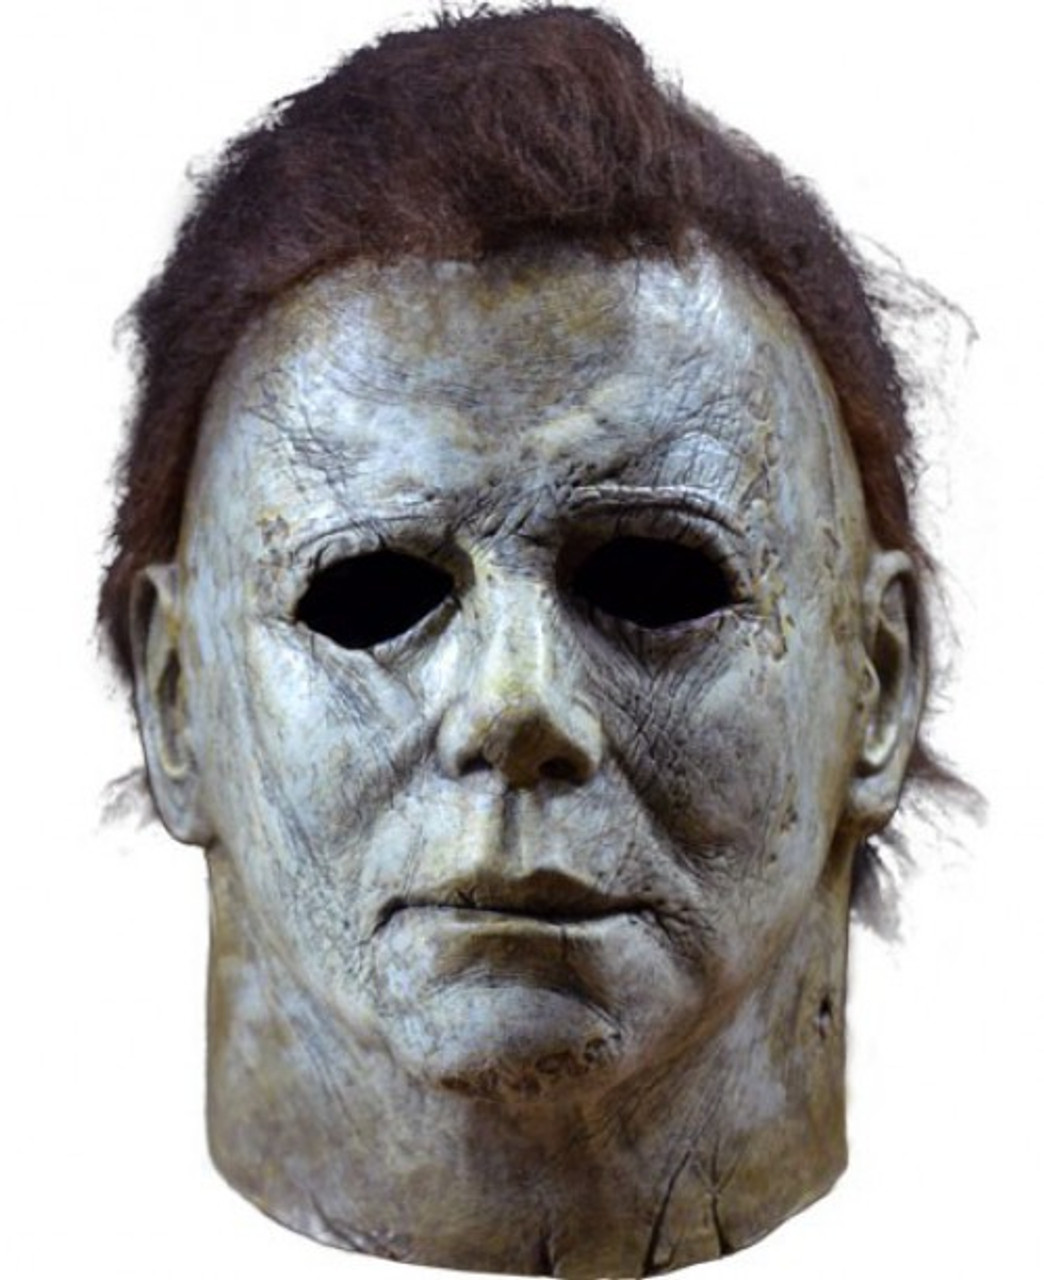 Halloween 2018 Michael Myers Mask Prop Replica Regular Version Trick Or Treat Studios Toywiz - i opened the new heaven egg and got this roblox halloween